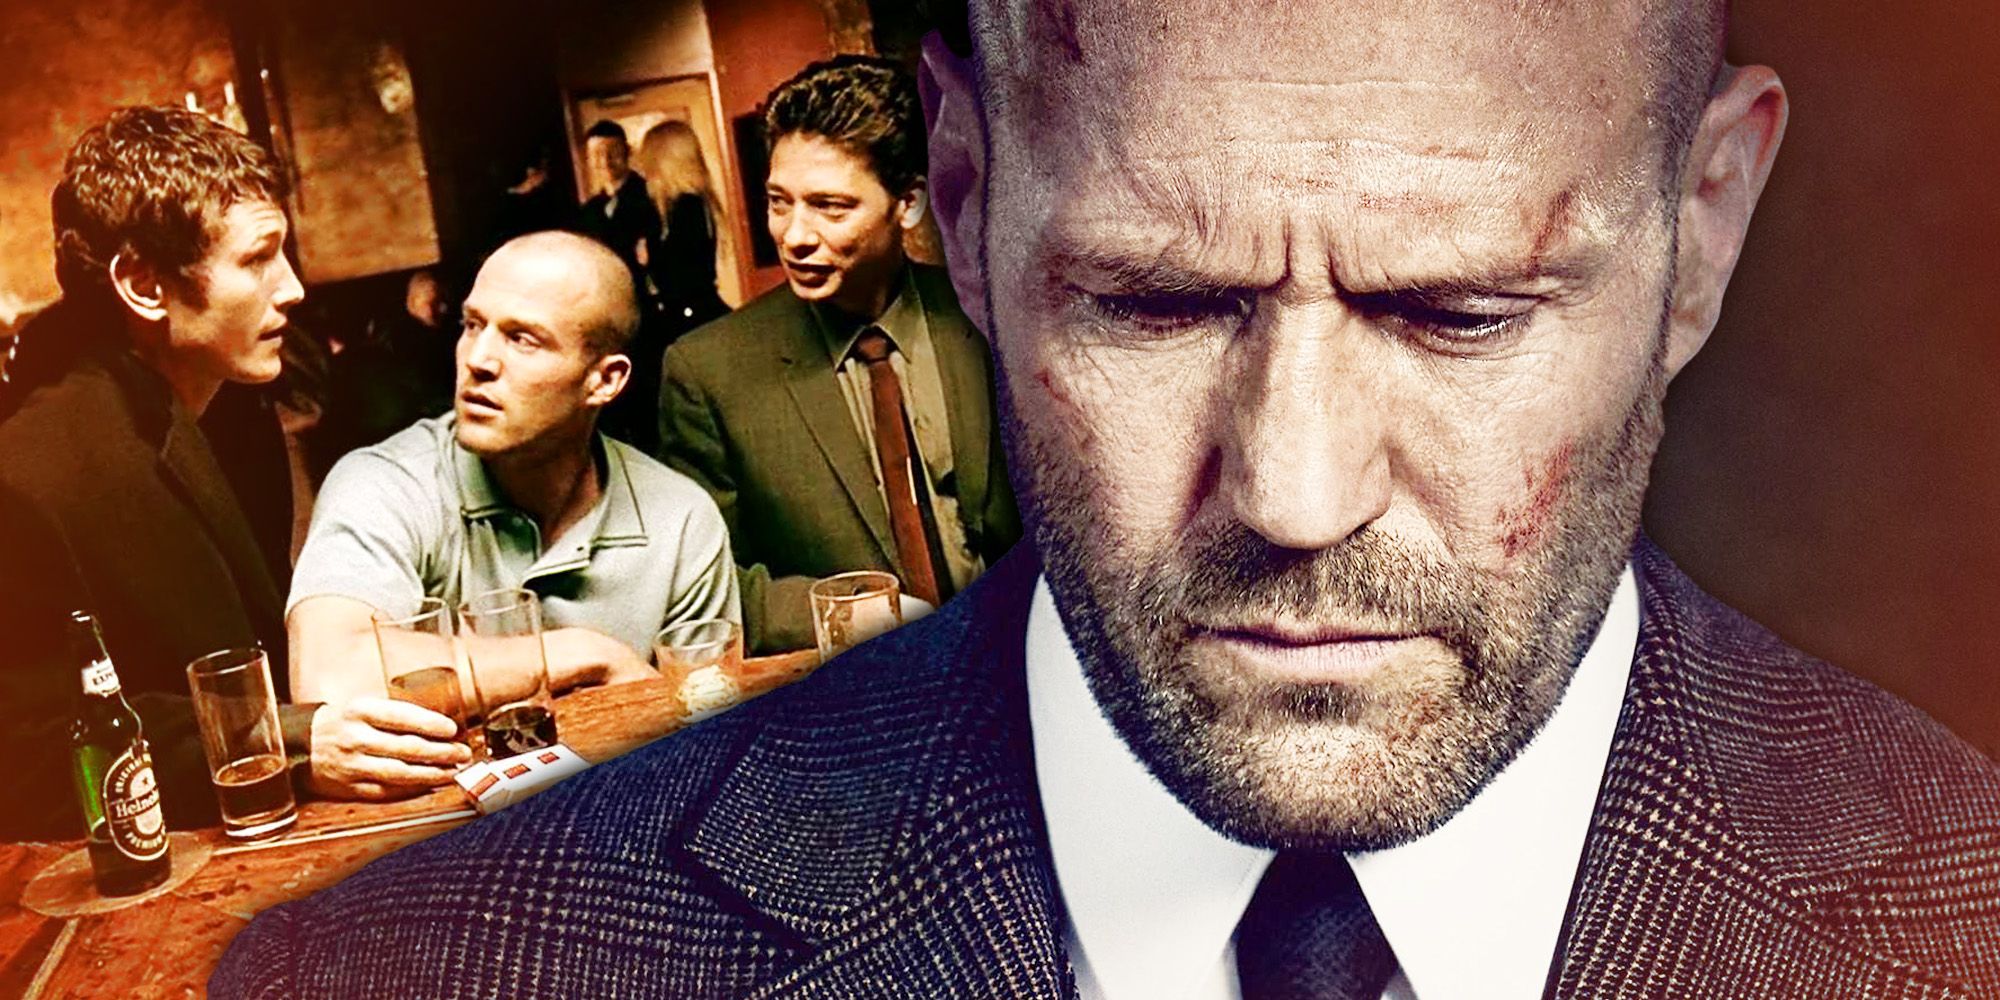 Jason Statham in Wrath of Man and Lock, Stock, and Two Smoking Barrels (1)